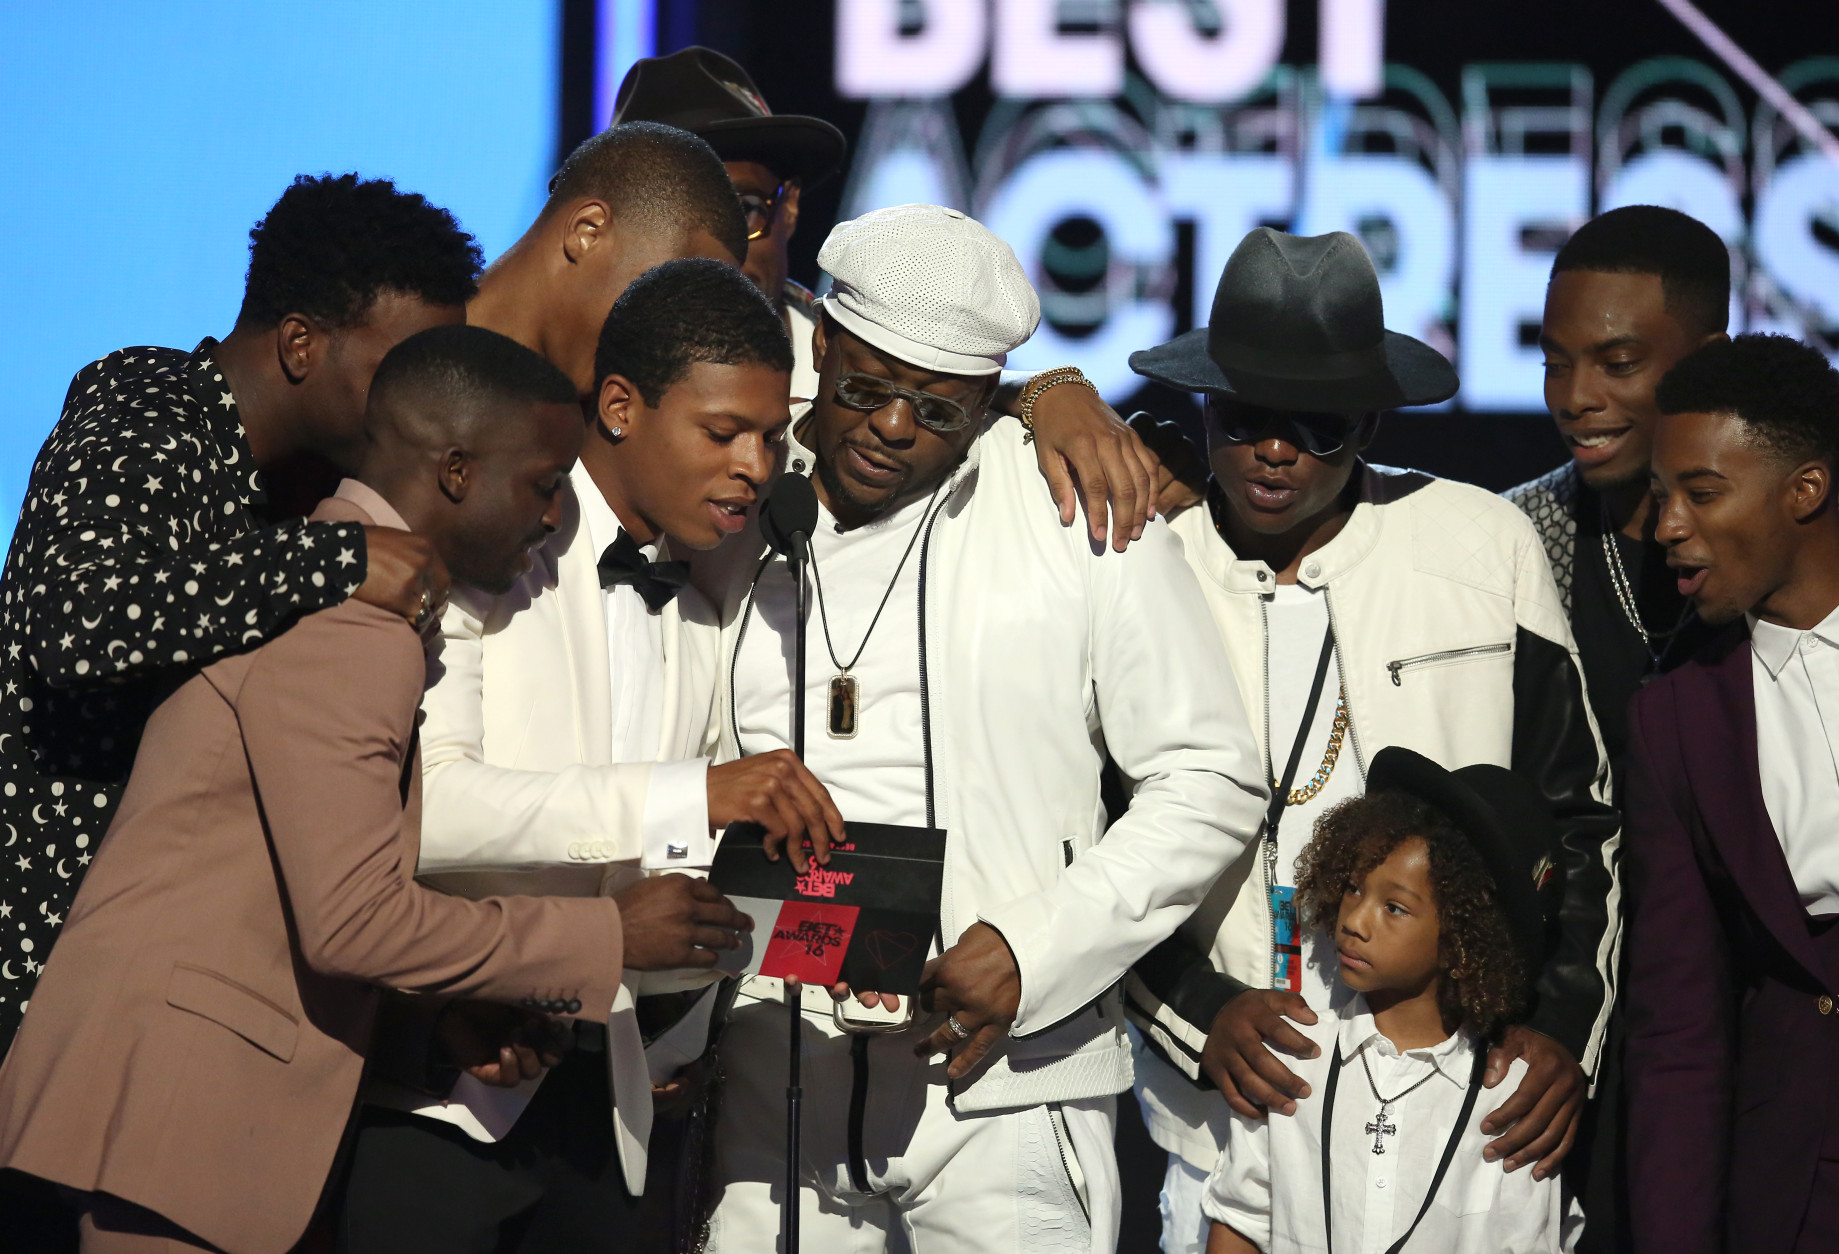 Bobby Brown, center, and the cast of New Edition present the award for best actress at the BET Awards at the Microsoft Theater on Sunday, June 26, 2016, in Los Angeles. (Photo by Matt Sayles/Invision/AP)